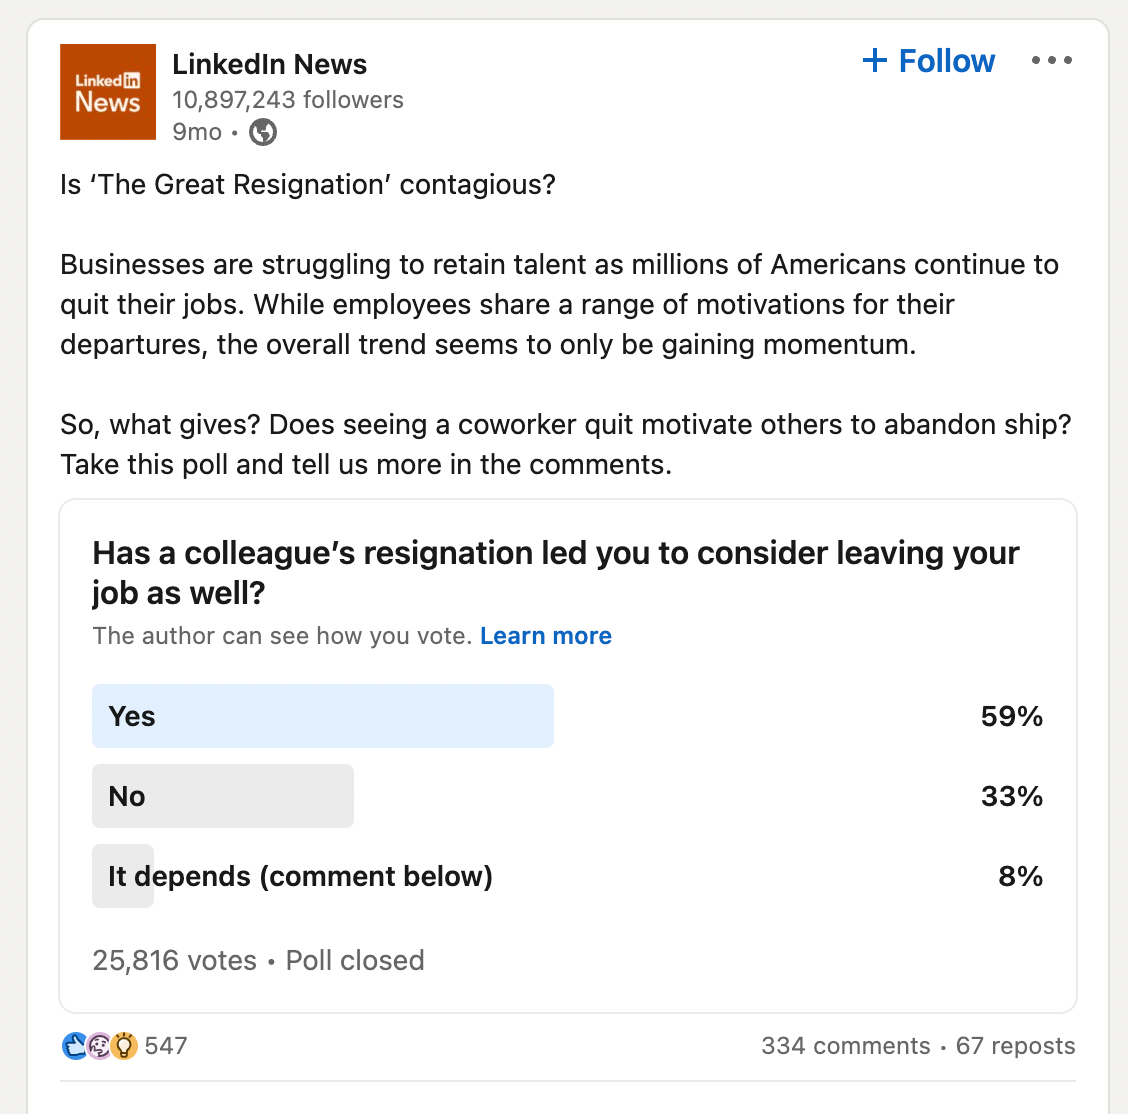 This Linkedin Poll found that 59% of respondents admit that a colleague's resignation motivates them to think about leaving their job as well. 